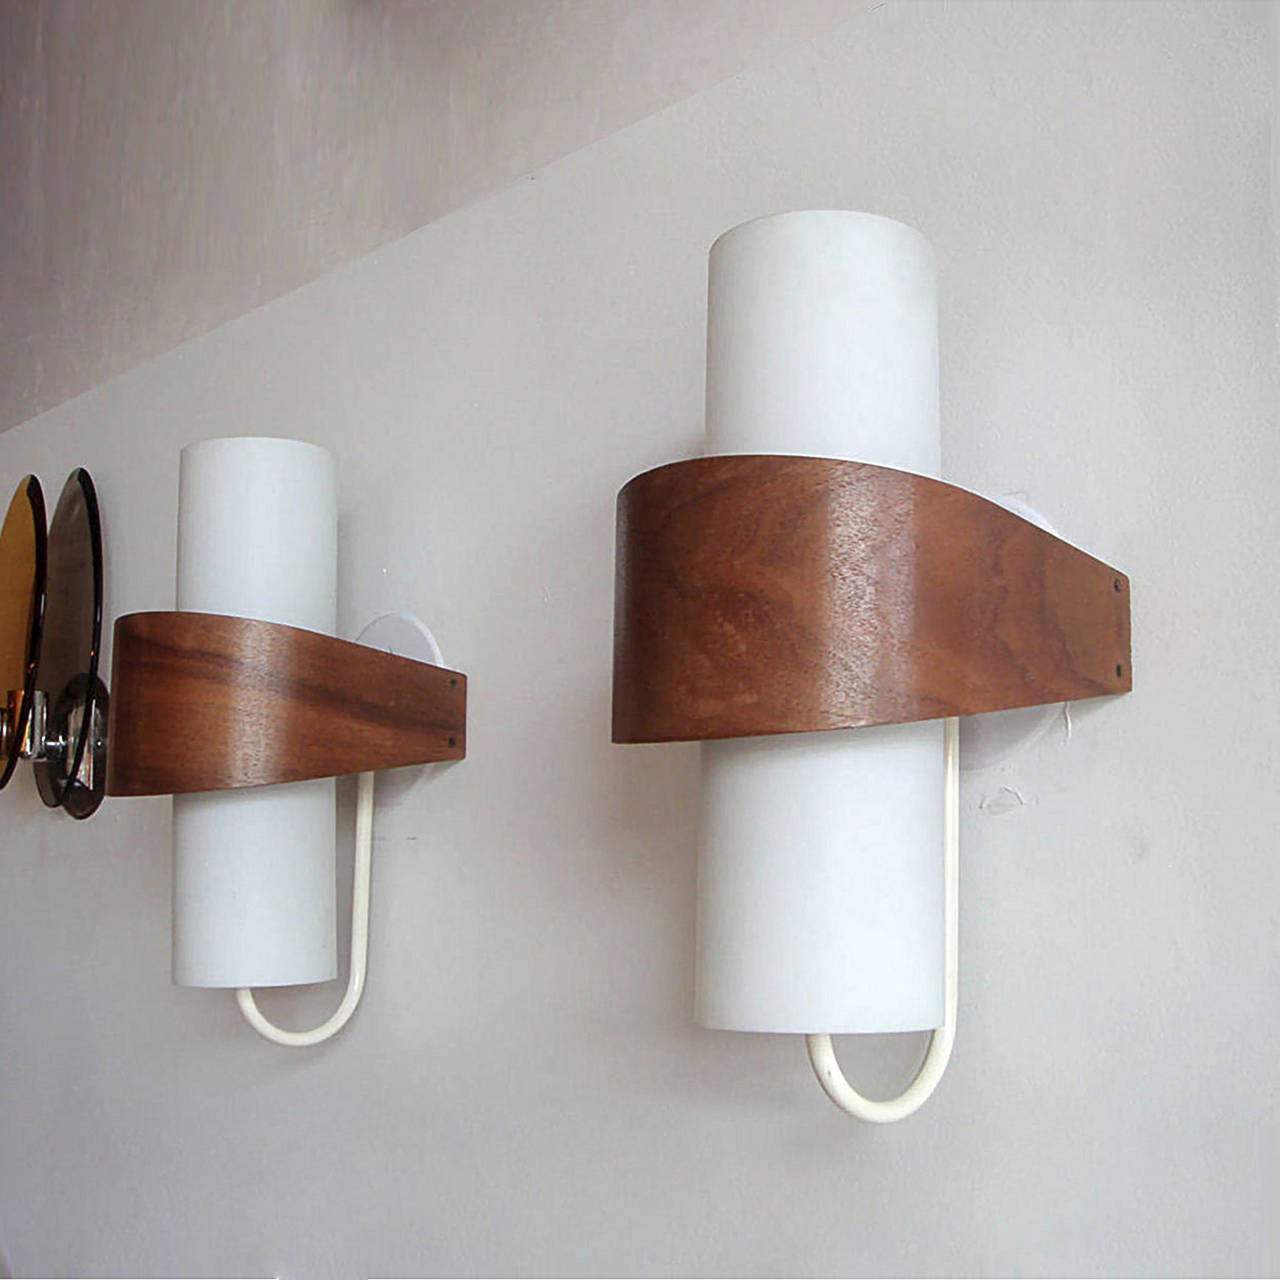 Elegant geometric sconces composed of opaque glass cylinders with a teak veneer wrap, wired for US standards, one E27 socket, max. wattage 60w, bulb provided as a onetime courtesy. Priced individually.